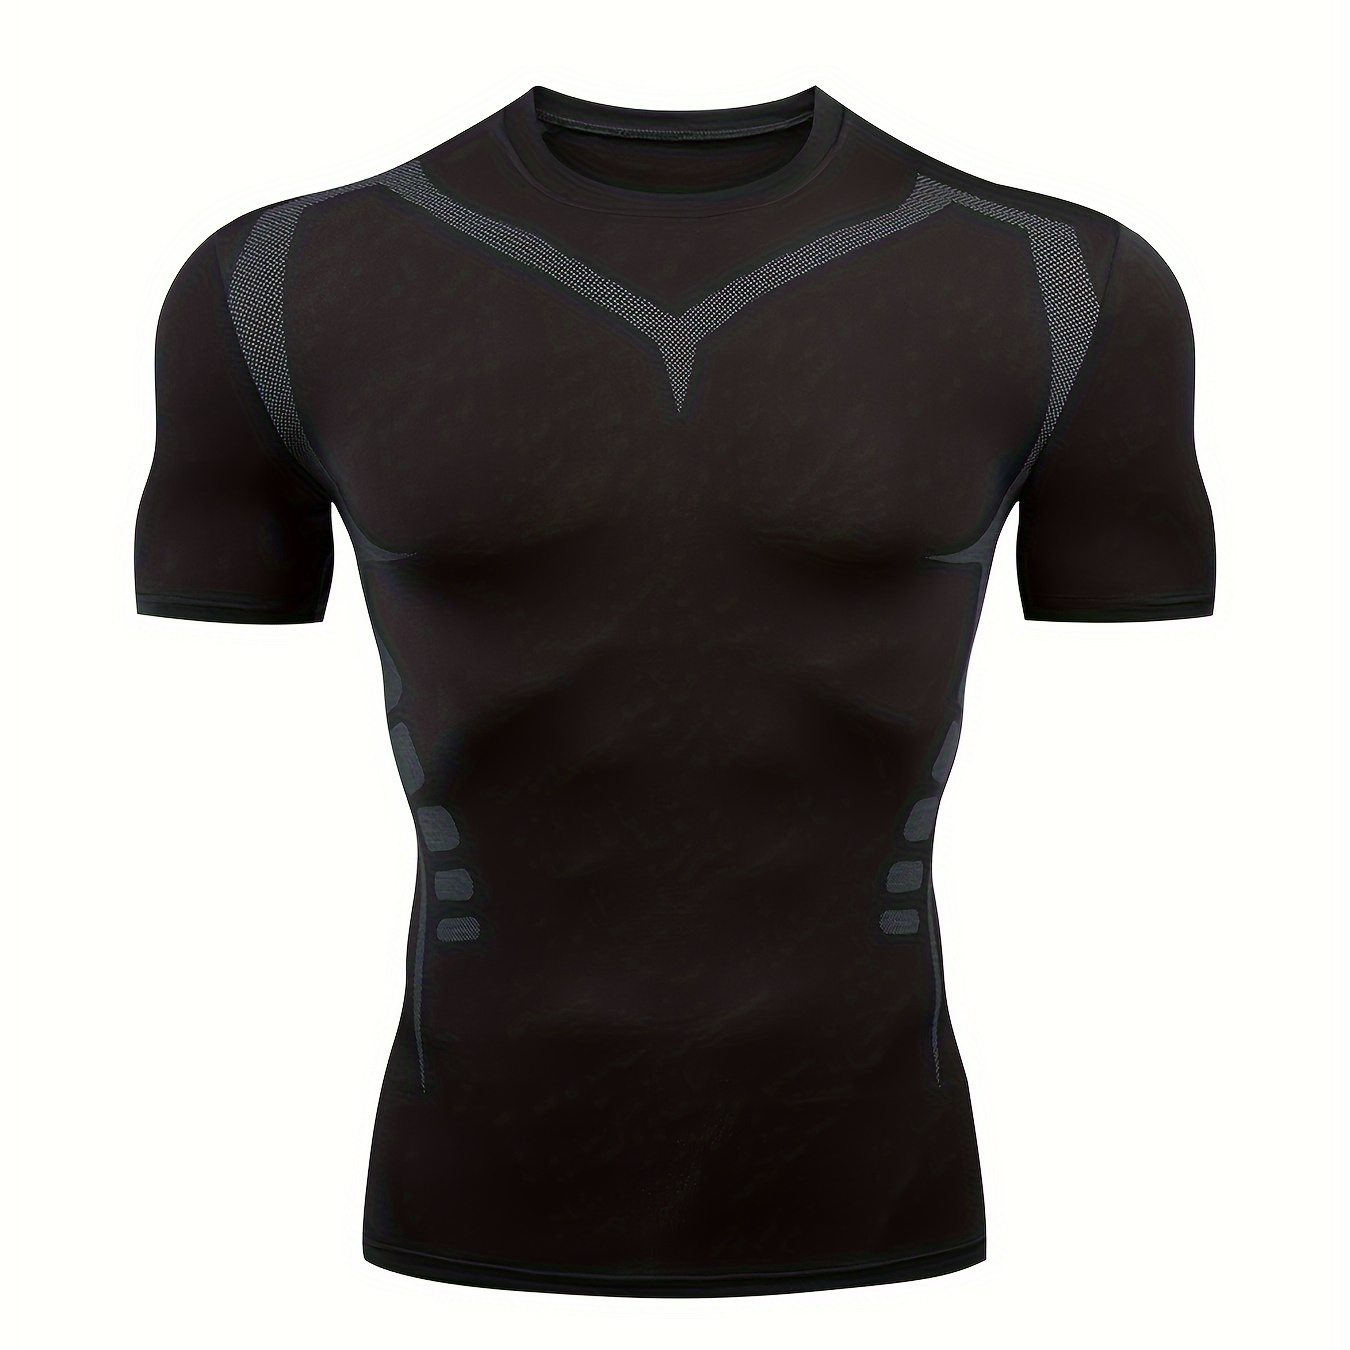 

Men's Compression Shirts Men Short Sleeve Athletic Cold Weather Baselayer Undershirt Gear Tshirt For Sports Workout